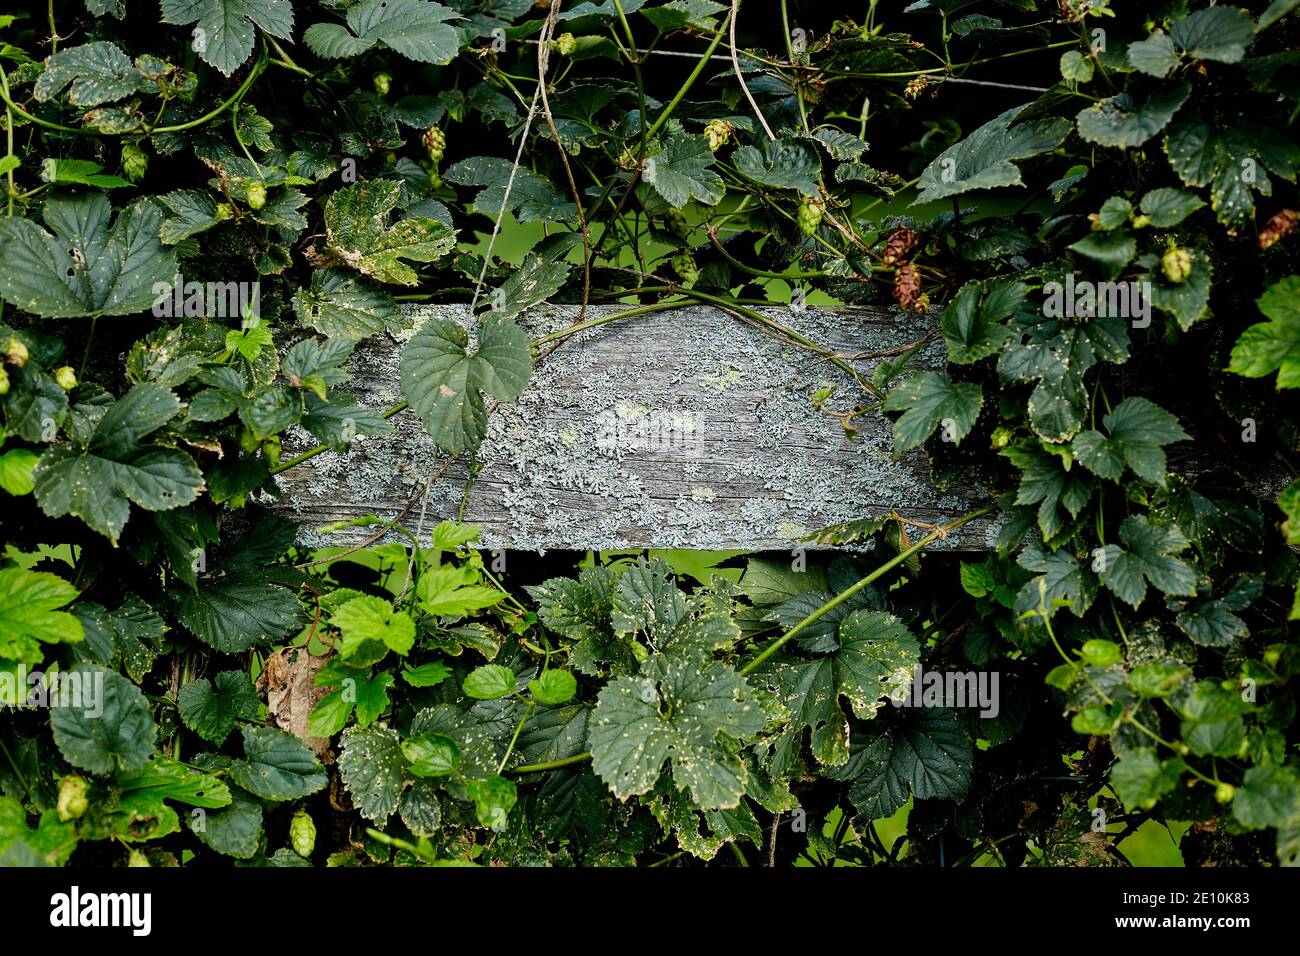 Lichen Growing on the Plank of a Fence Surrounded by Vines Stock Photo